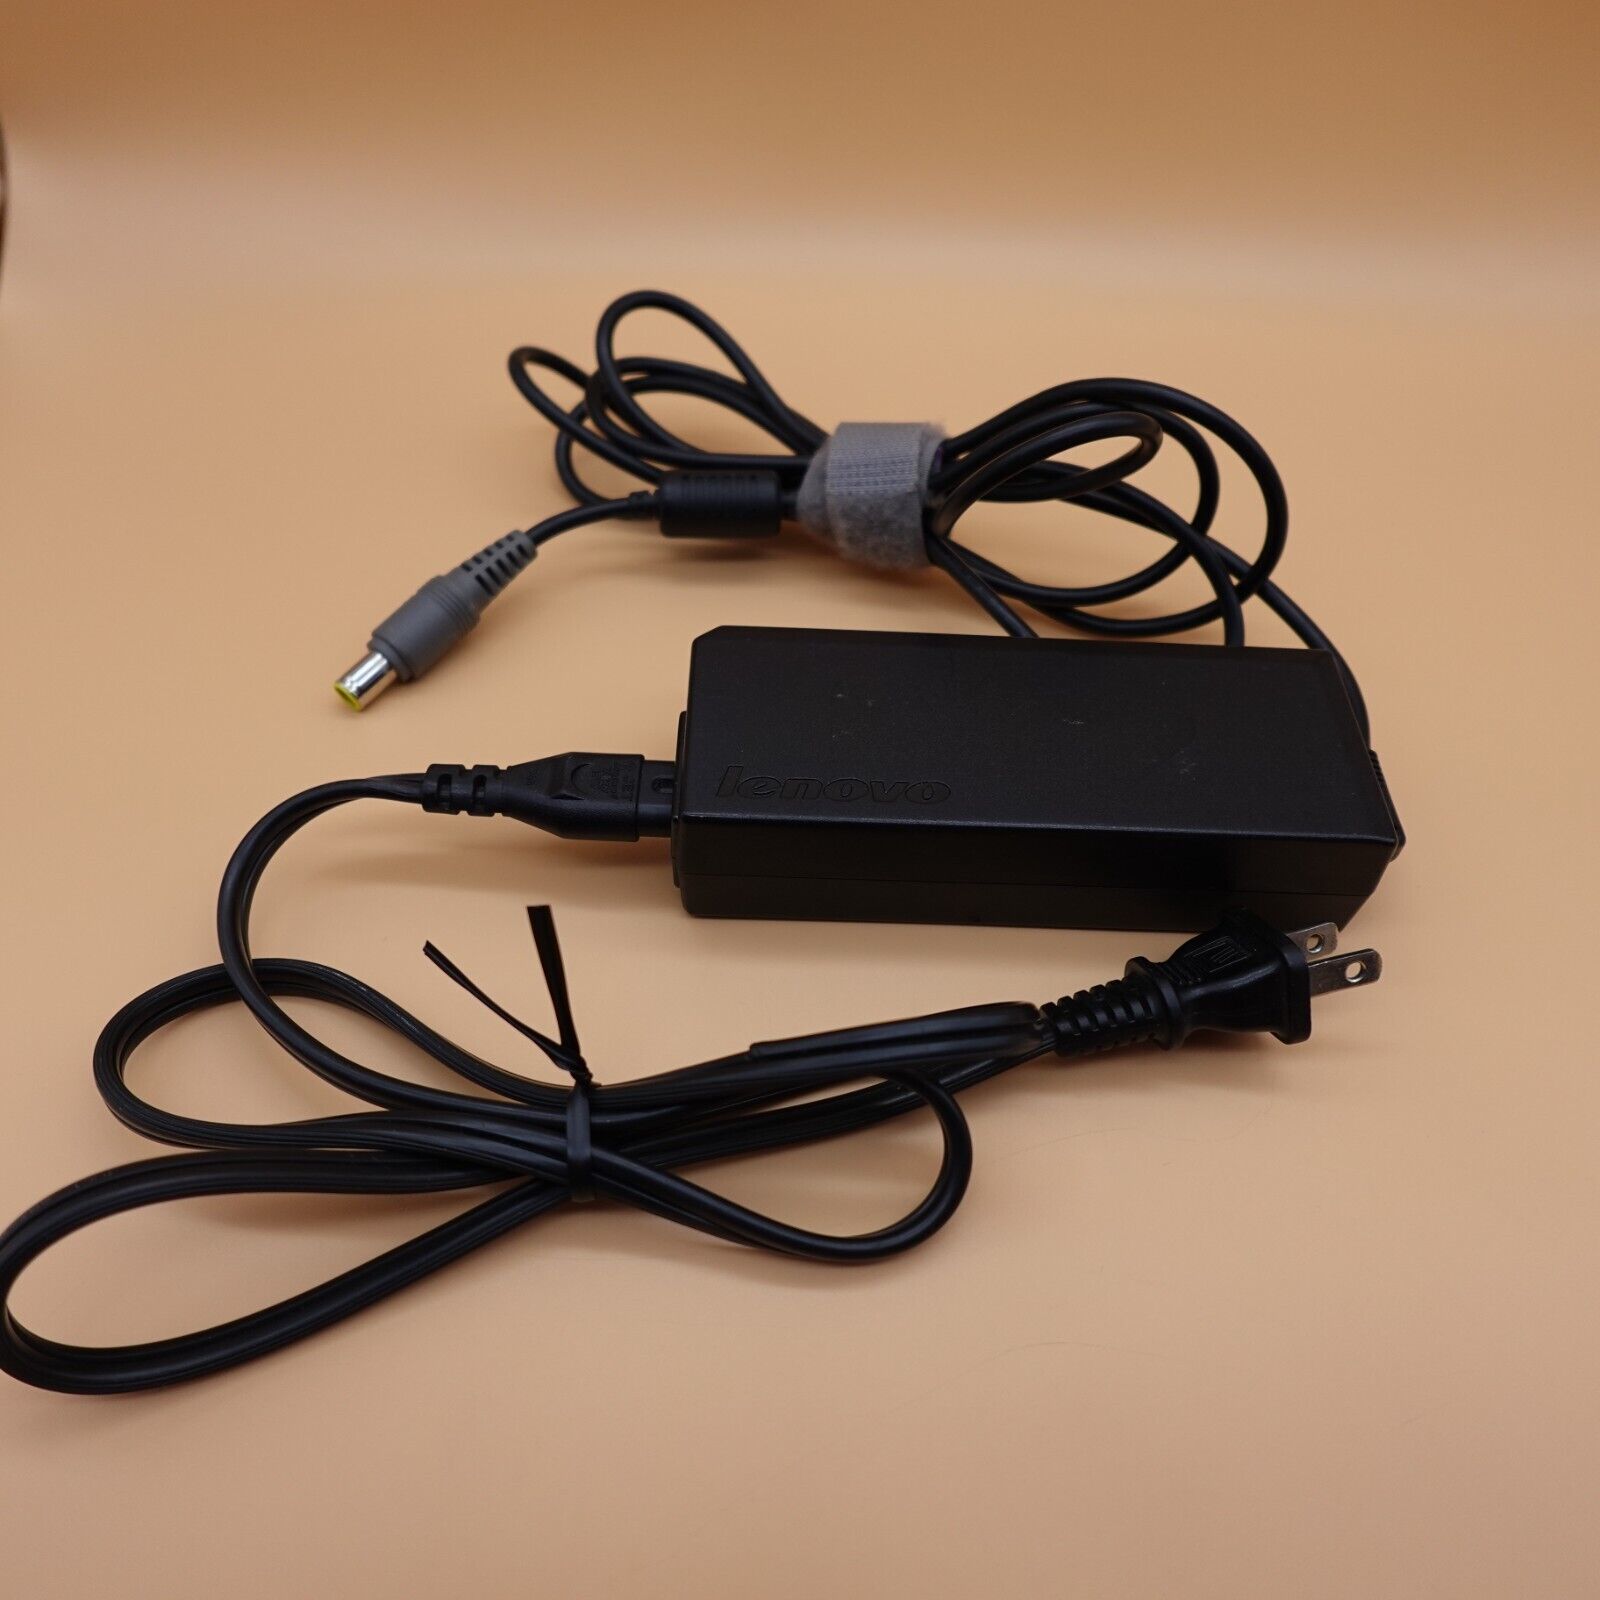 Lenovo Thinkpad Laptop Charger Genuine AC Adapter Power Supply 90W 20V 4.5A OEM - $14.96